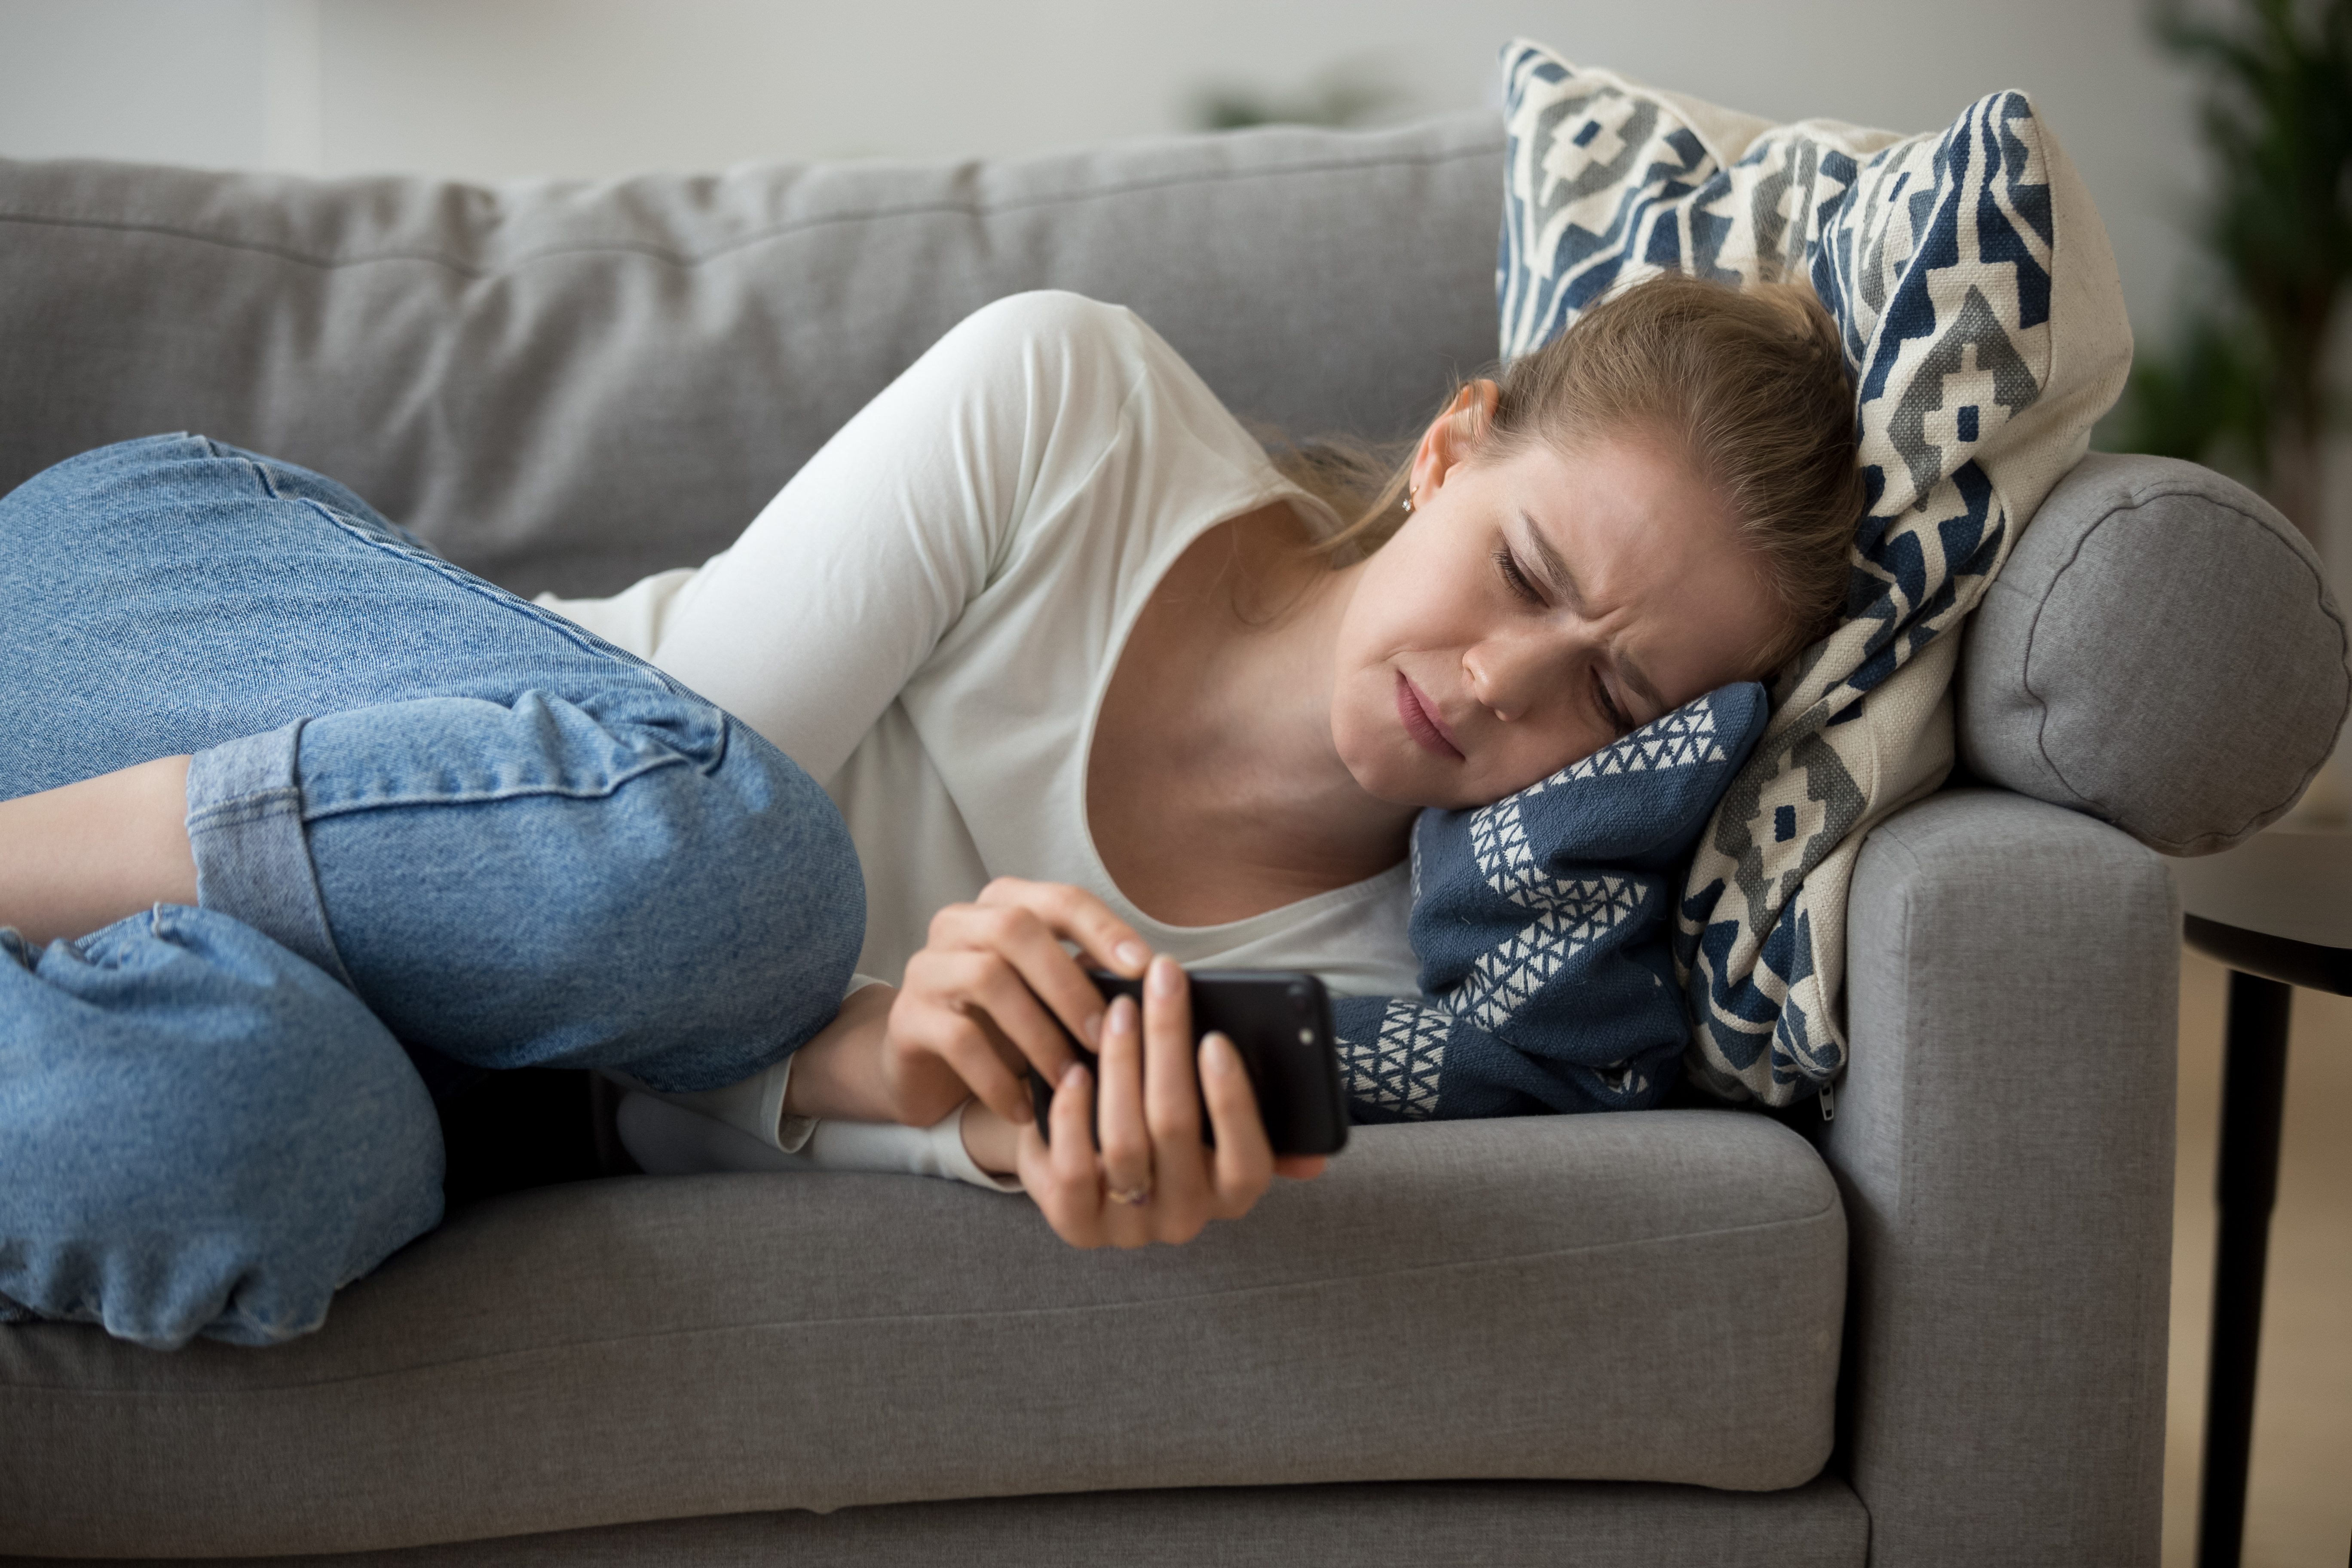 A crying woman lying on the sofa looking at her phone | Source: Shutterstock